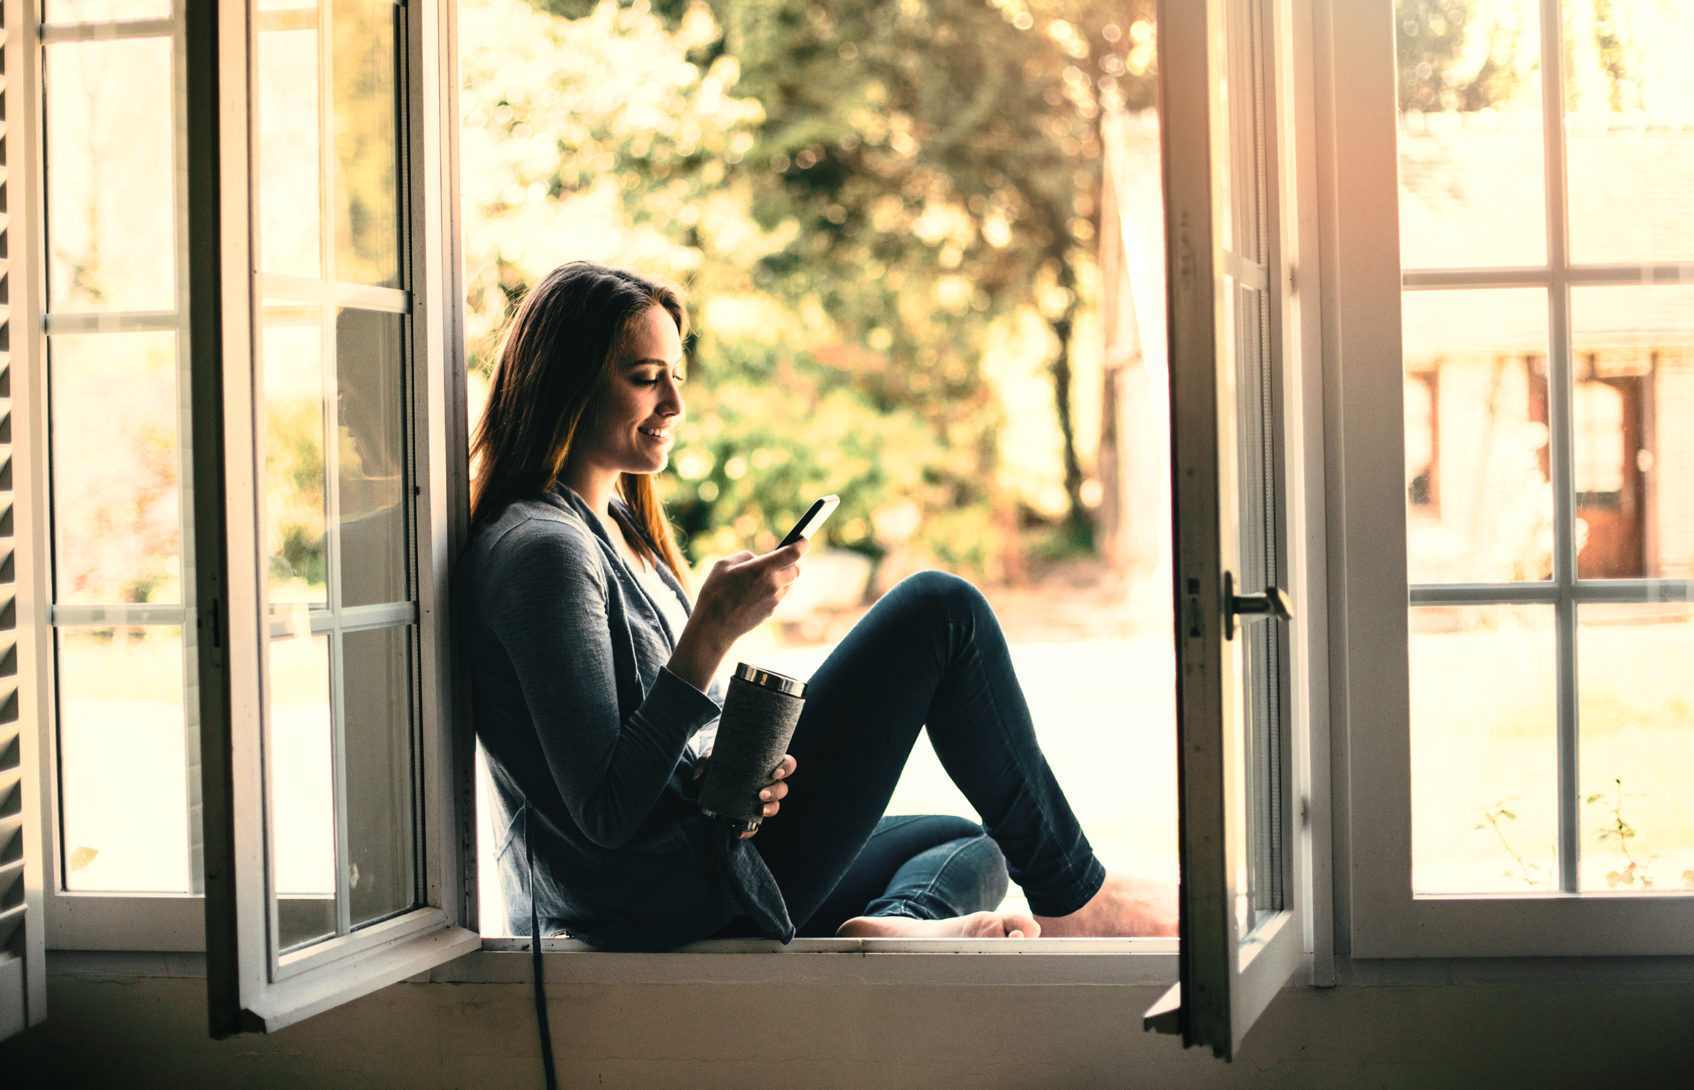 A woman sitting on the ledge of an open window, looking at her phone.